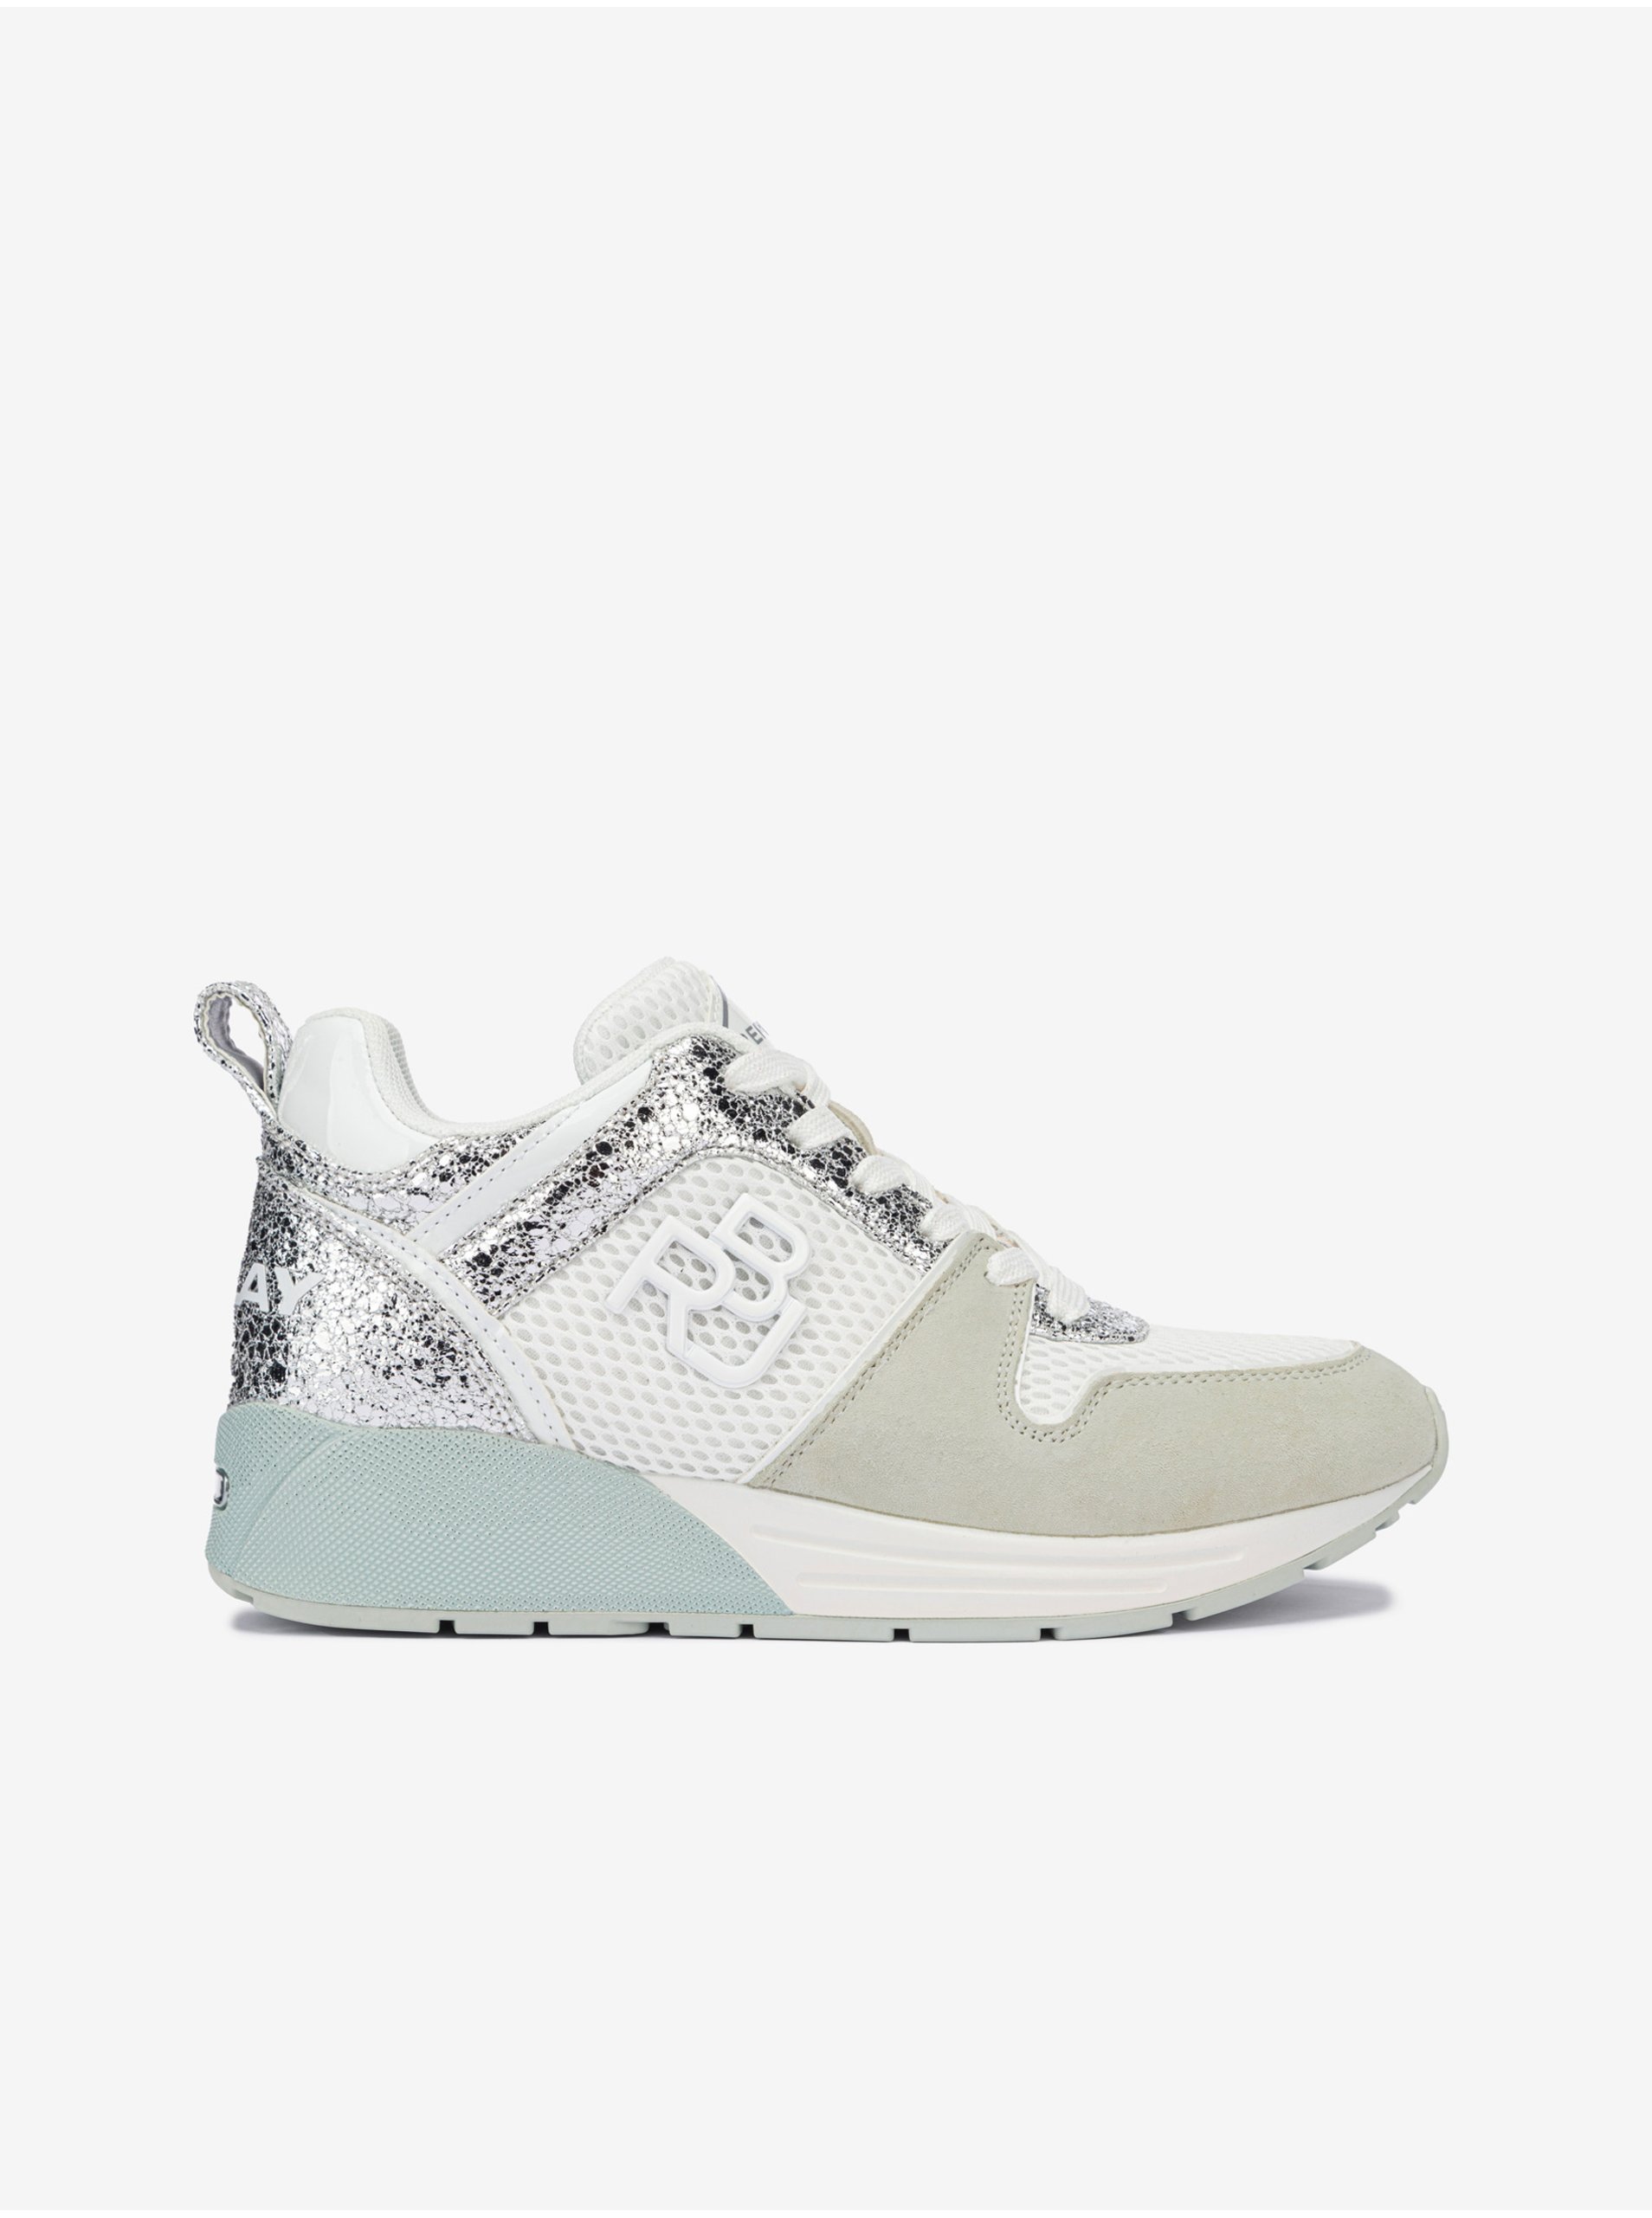 Women's Sneakers In White-Silver Replay - Womens